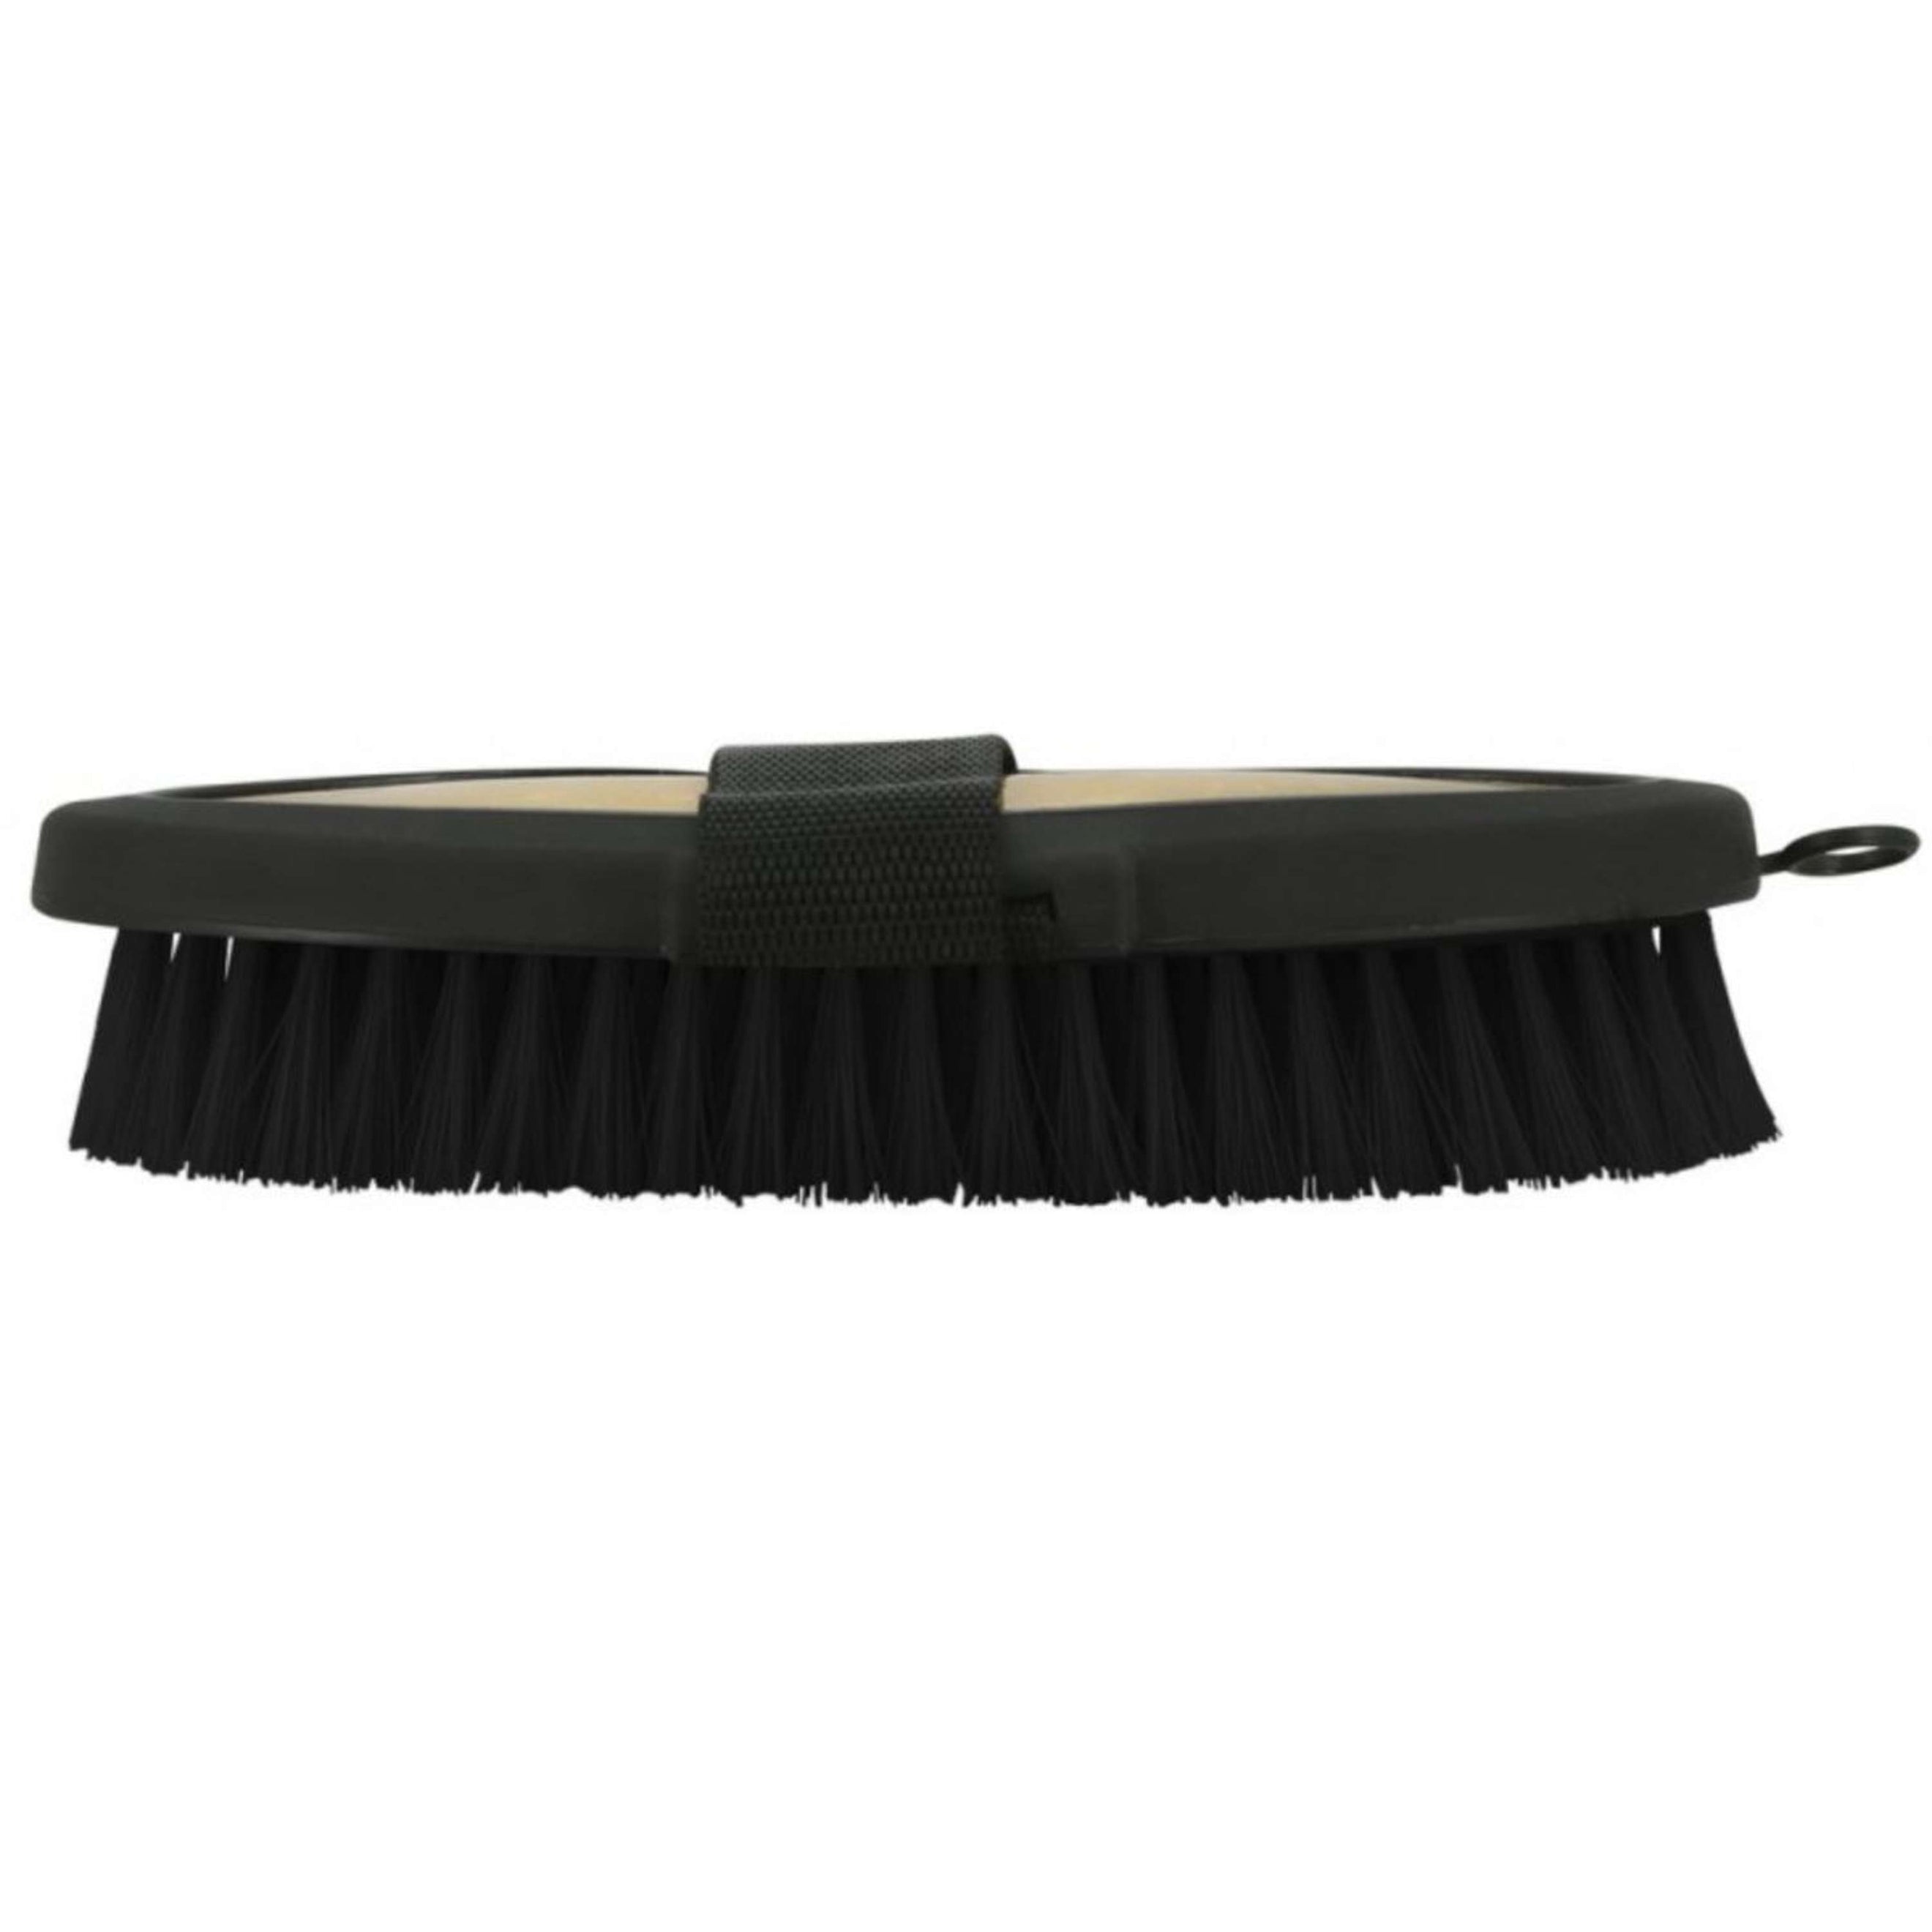 Hippotonic Brosse Glossy Faible Or